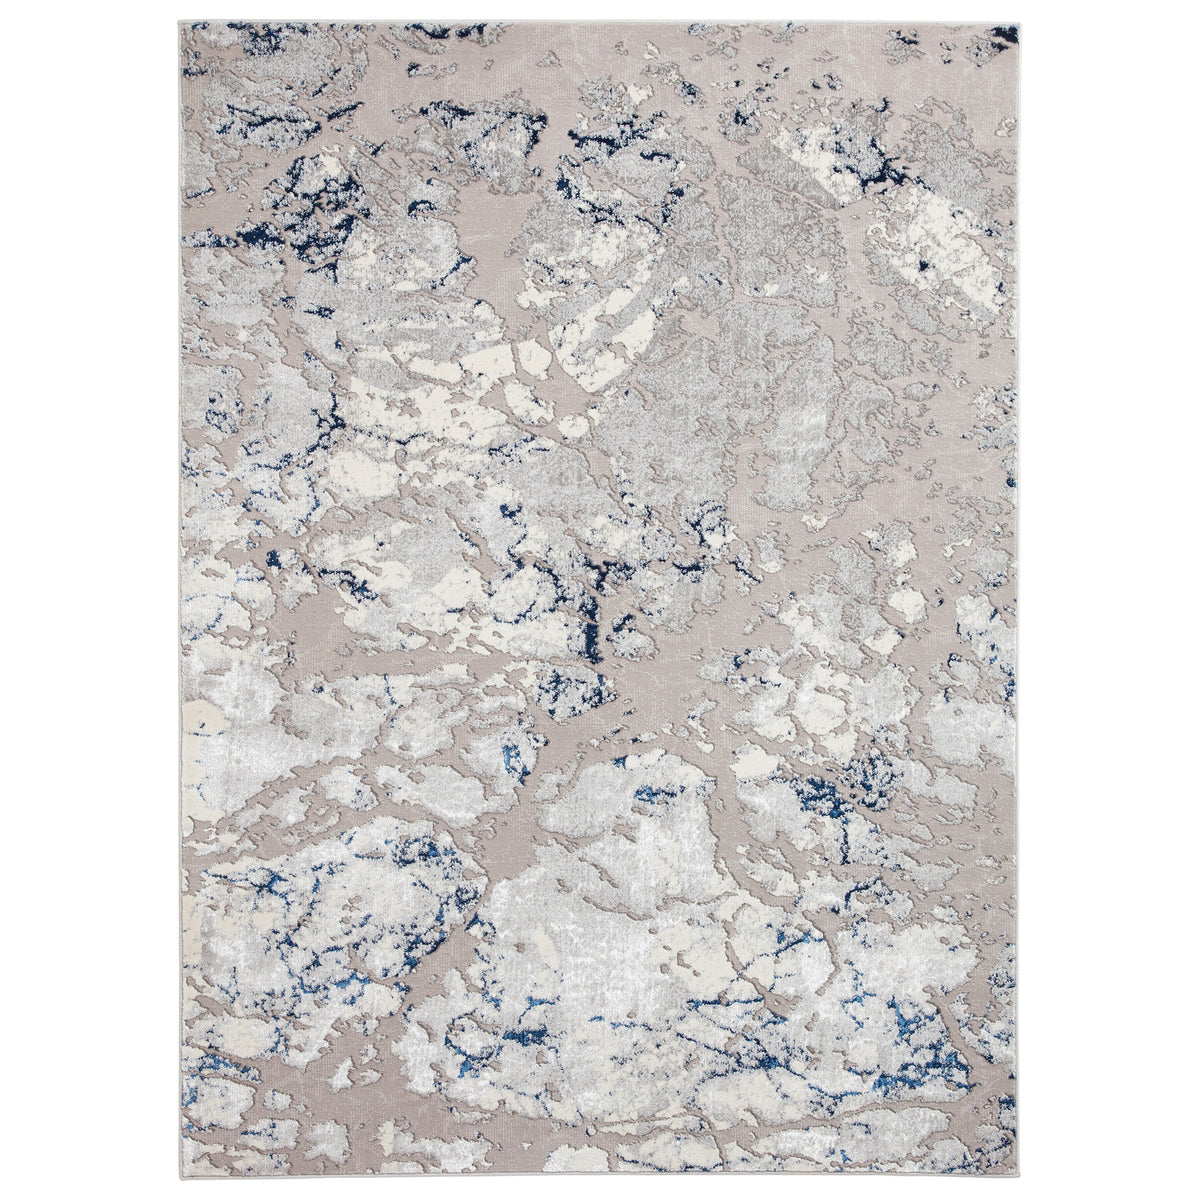 Aldrin Grey Navy Marble Effect Rug from Roseland furniture